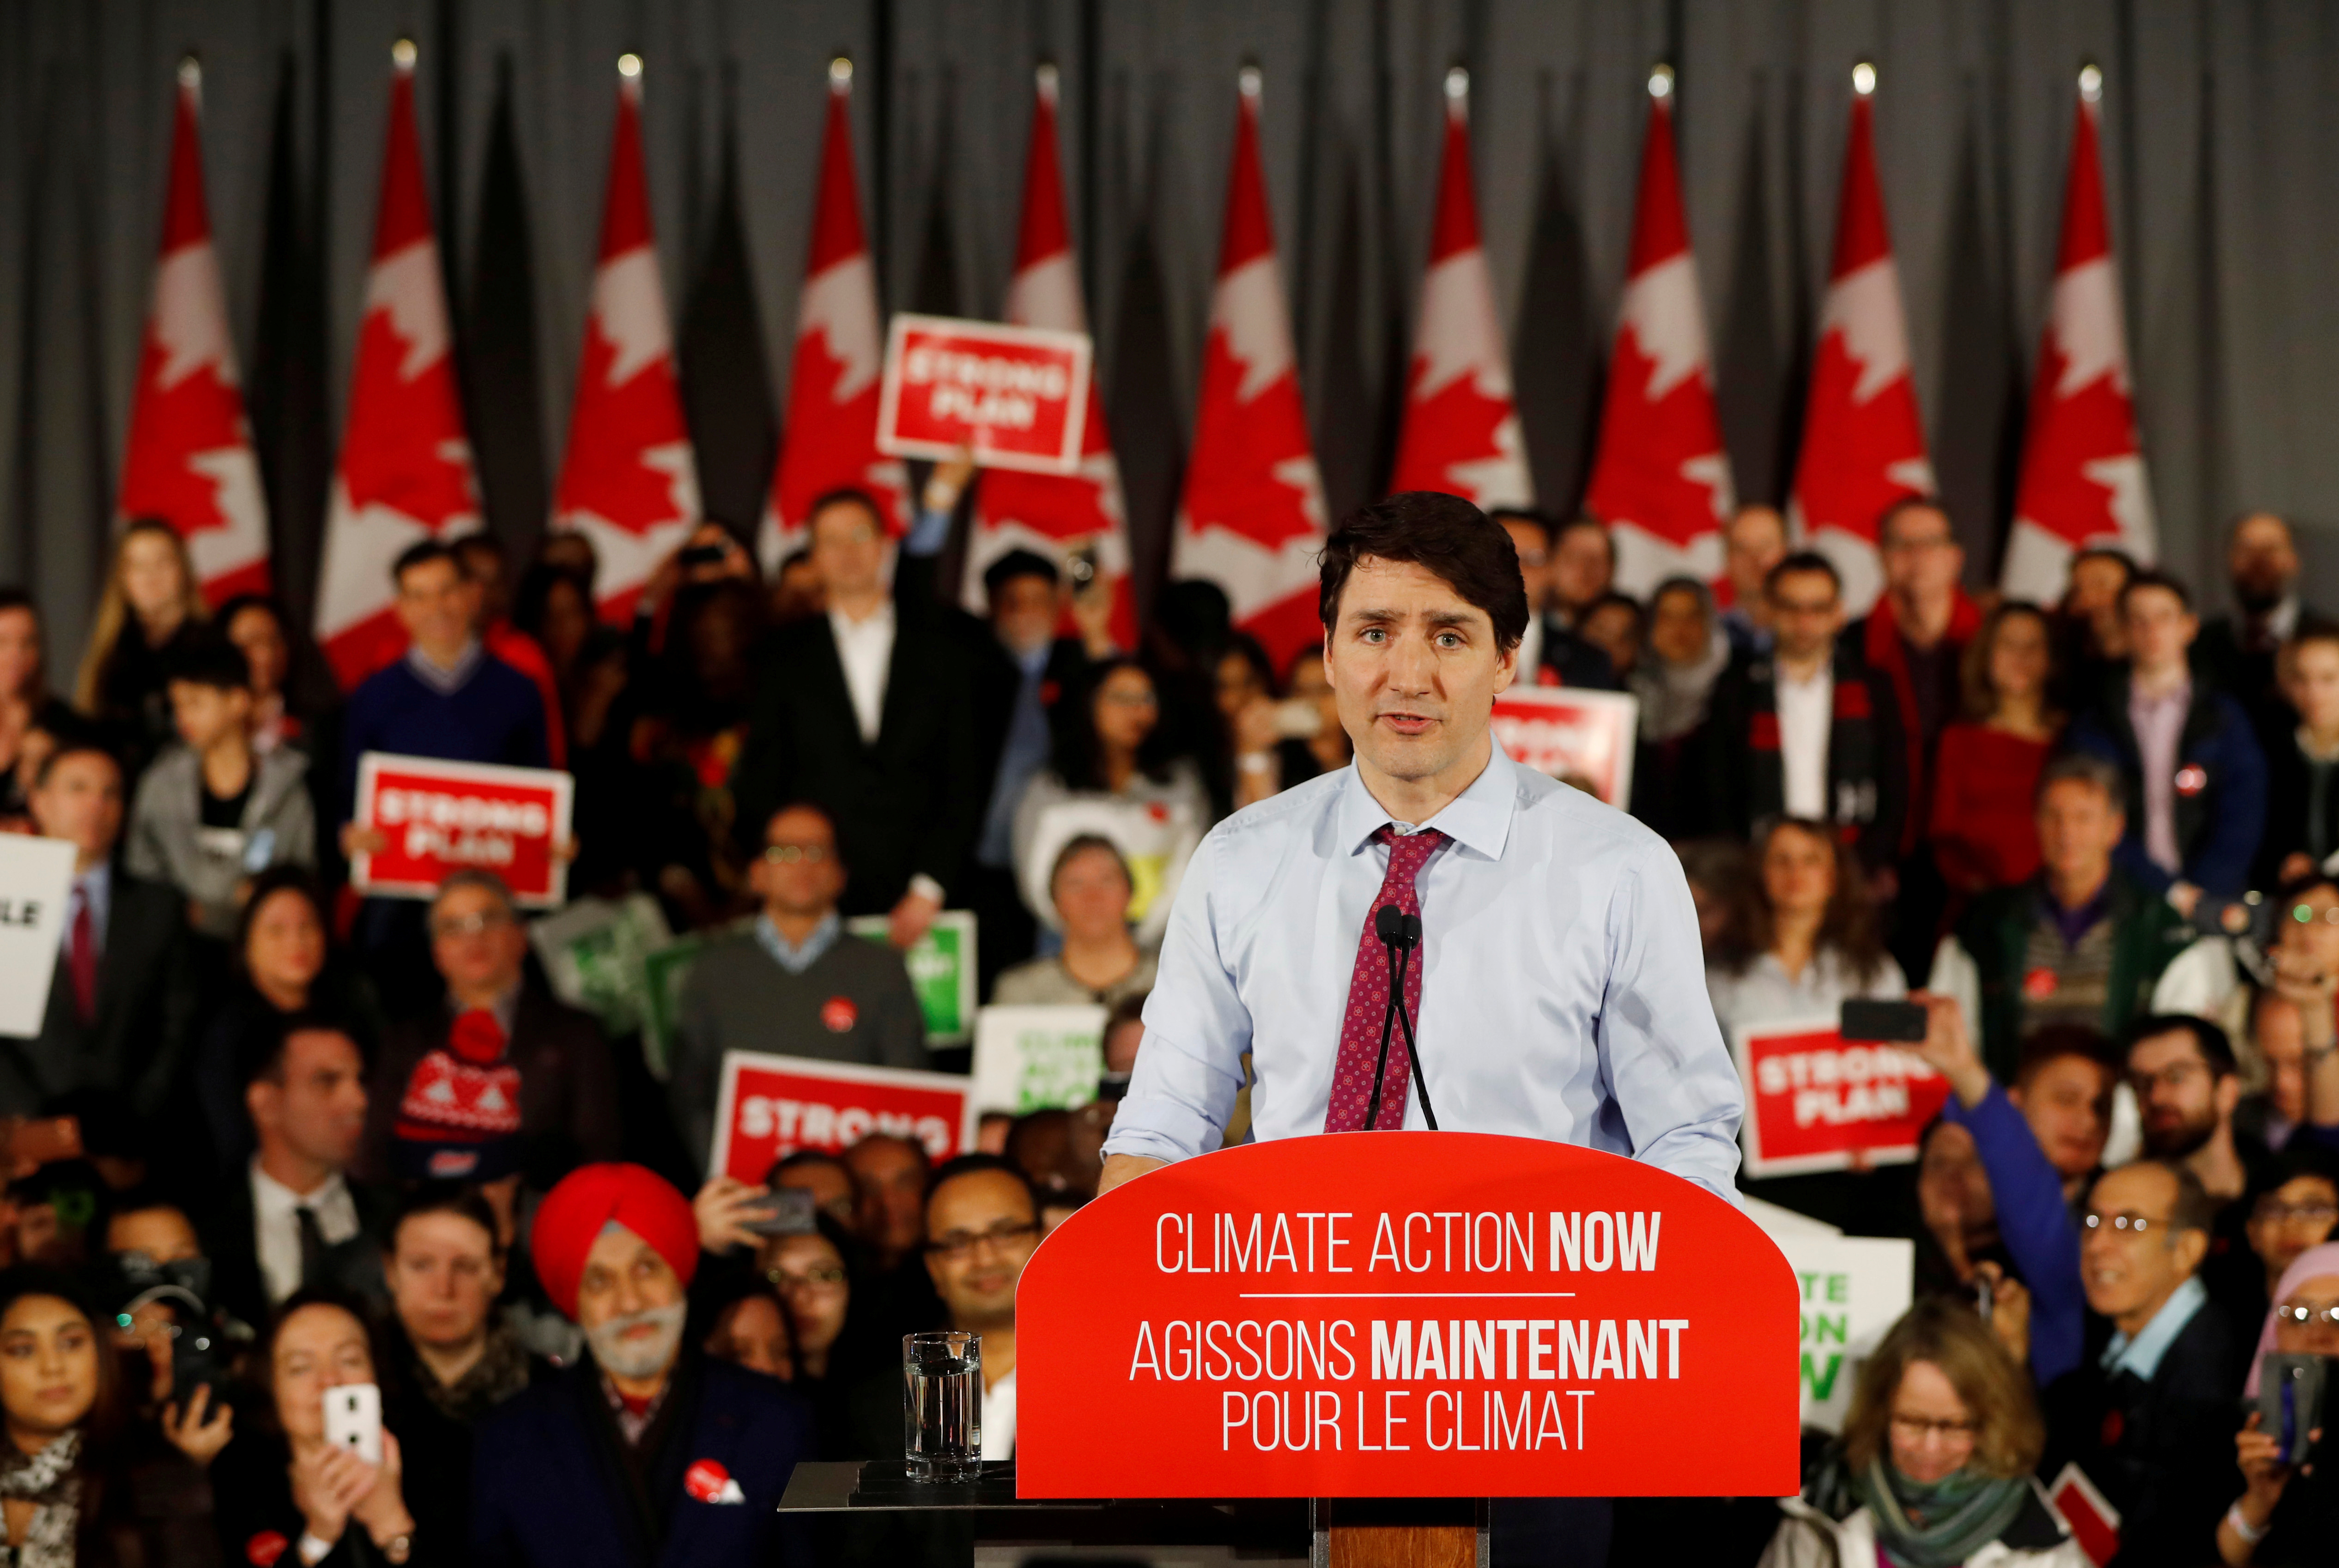 Canada's Prime Minister Justin Trudeau speaks during a Liberal Climate Action Rally in Toronto, Ontario, Canada March 4, 2019.  REUTERS/Mark Blinch